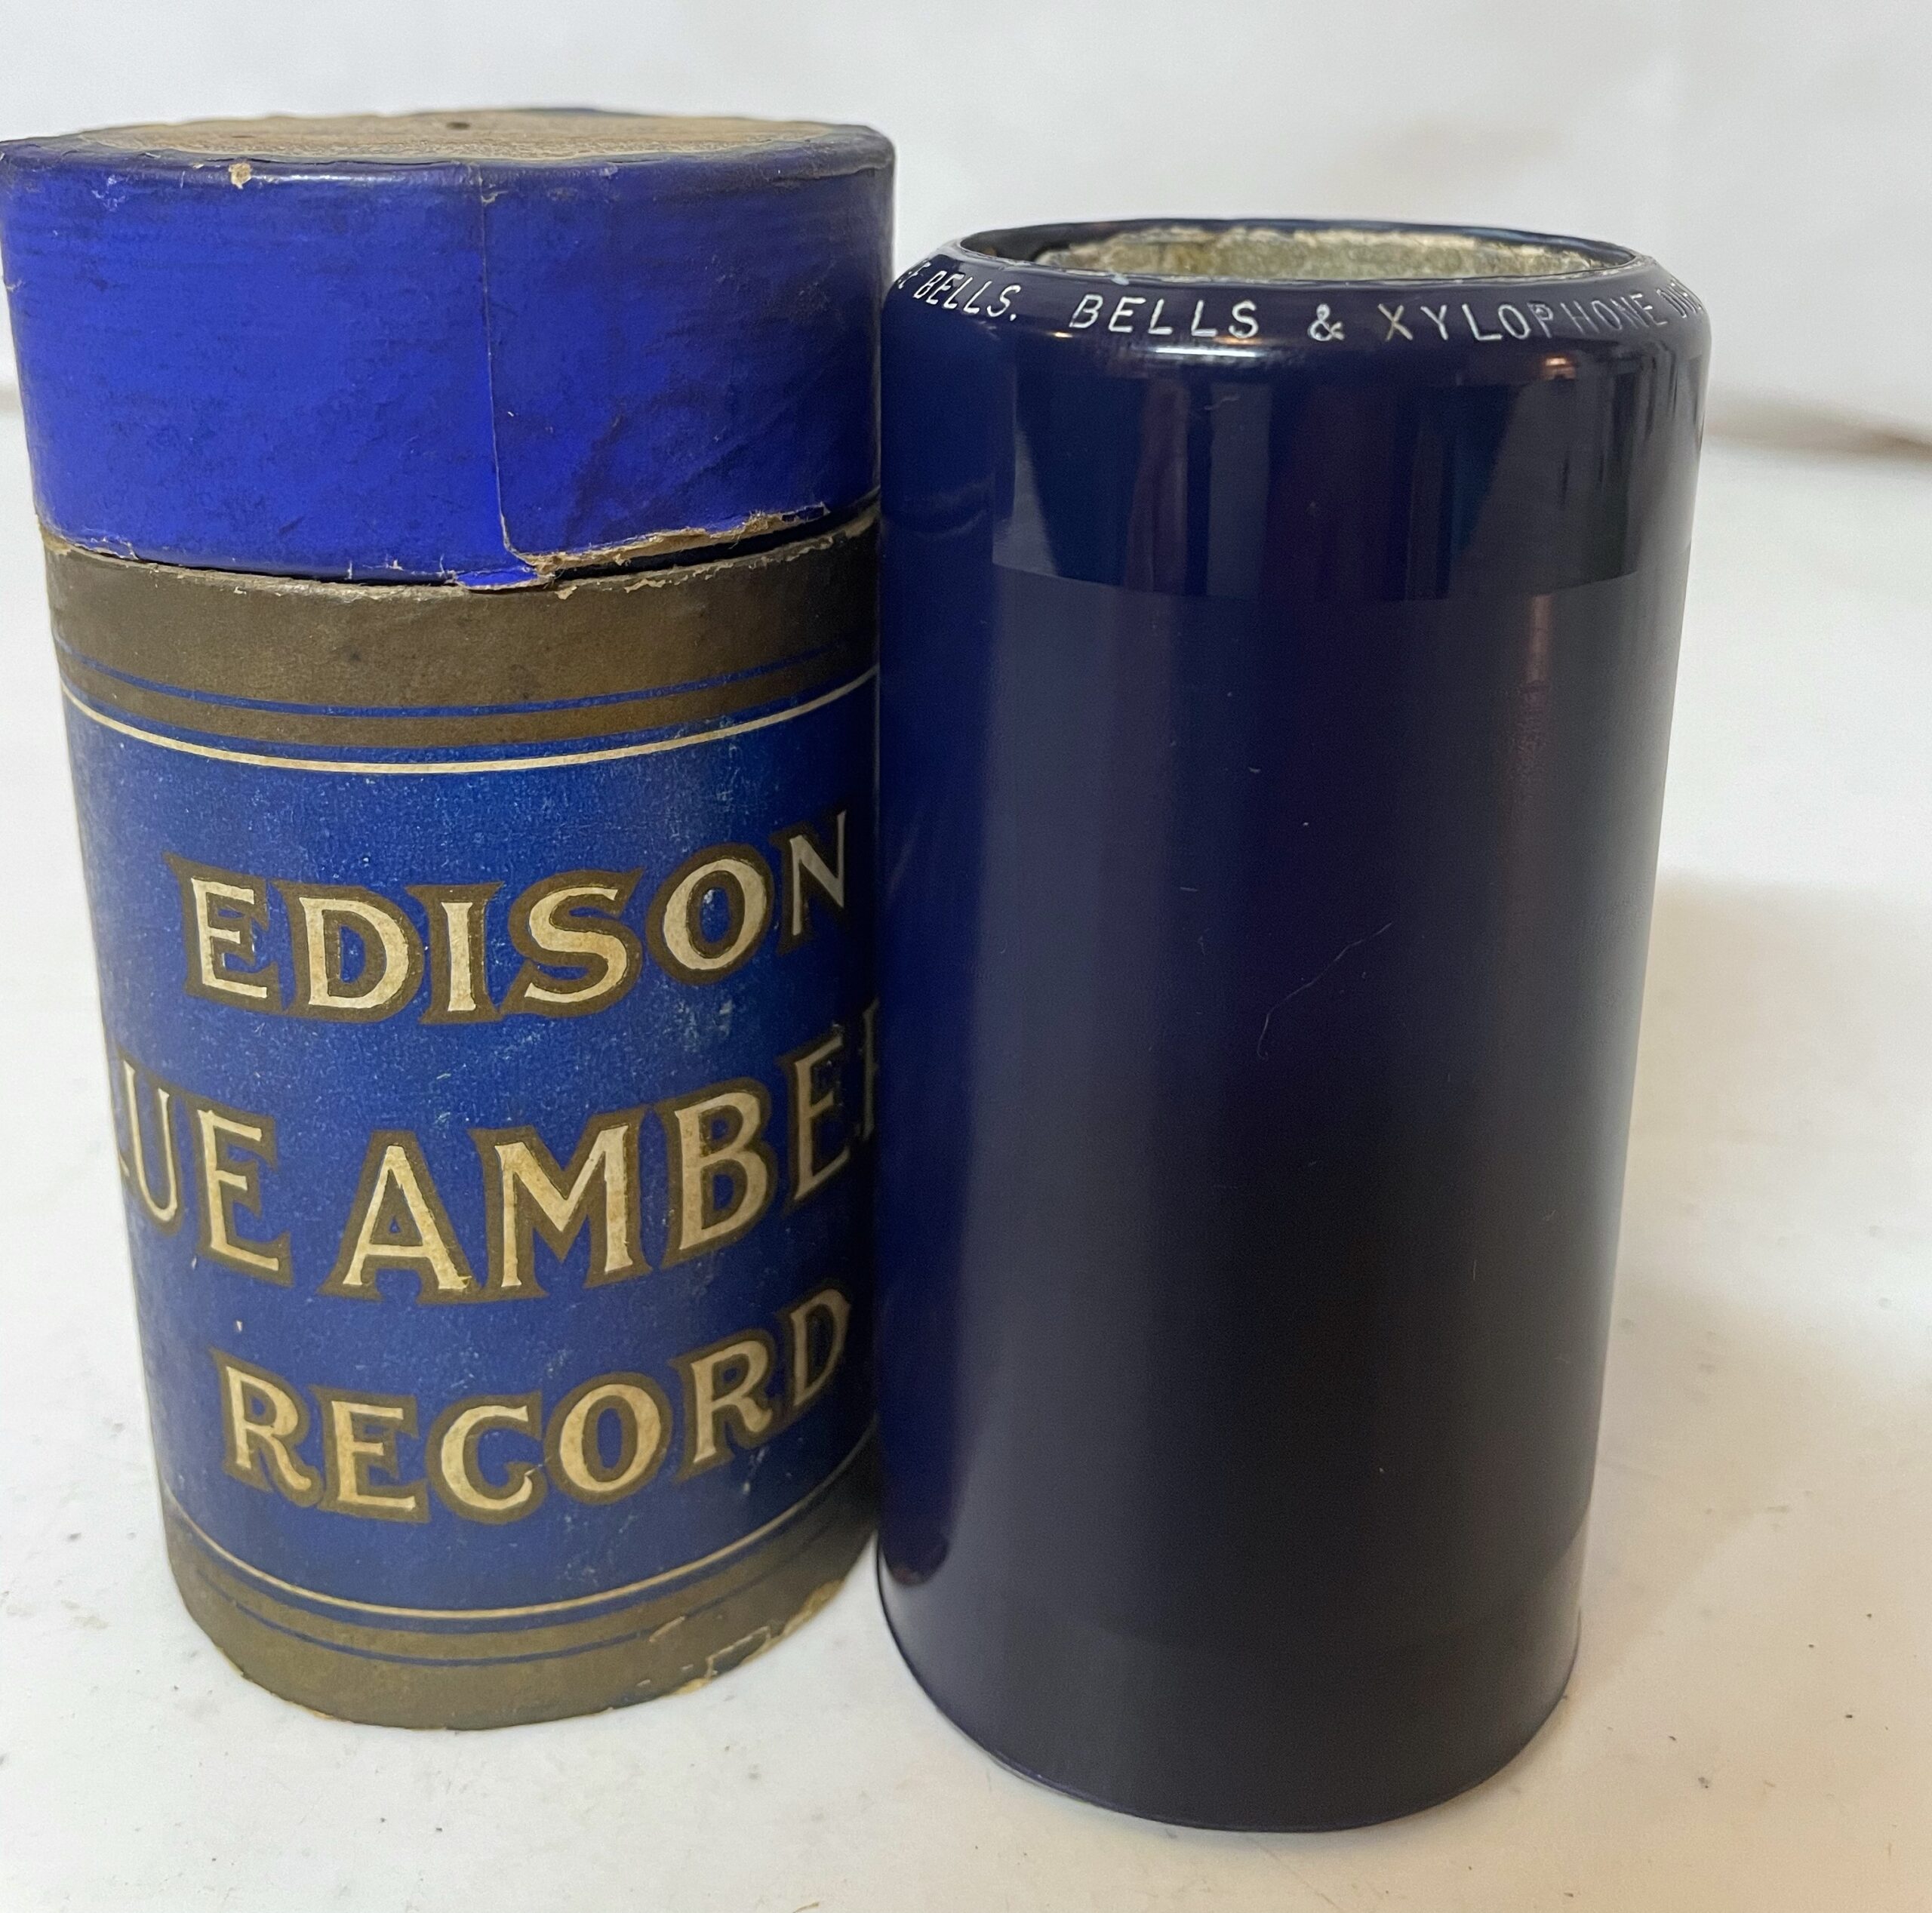 Edison 4 min. Cylinder… “The Revival Meeting at Pumpkin Center”